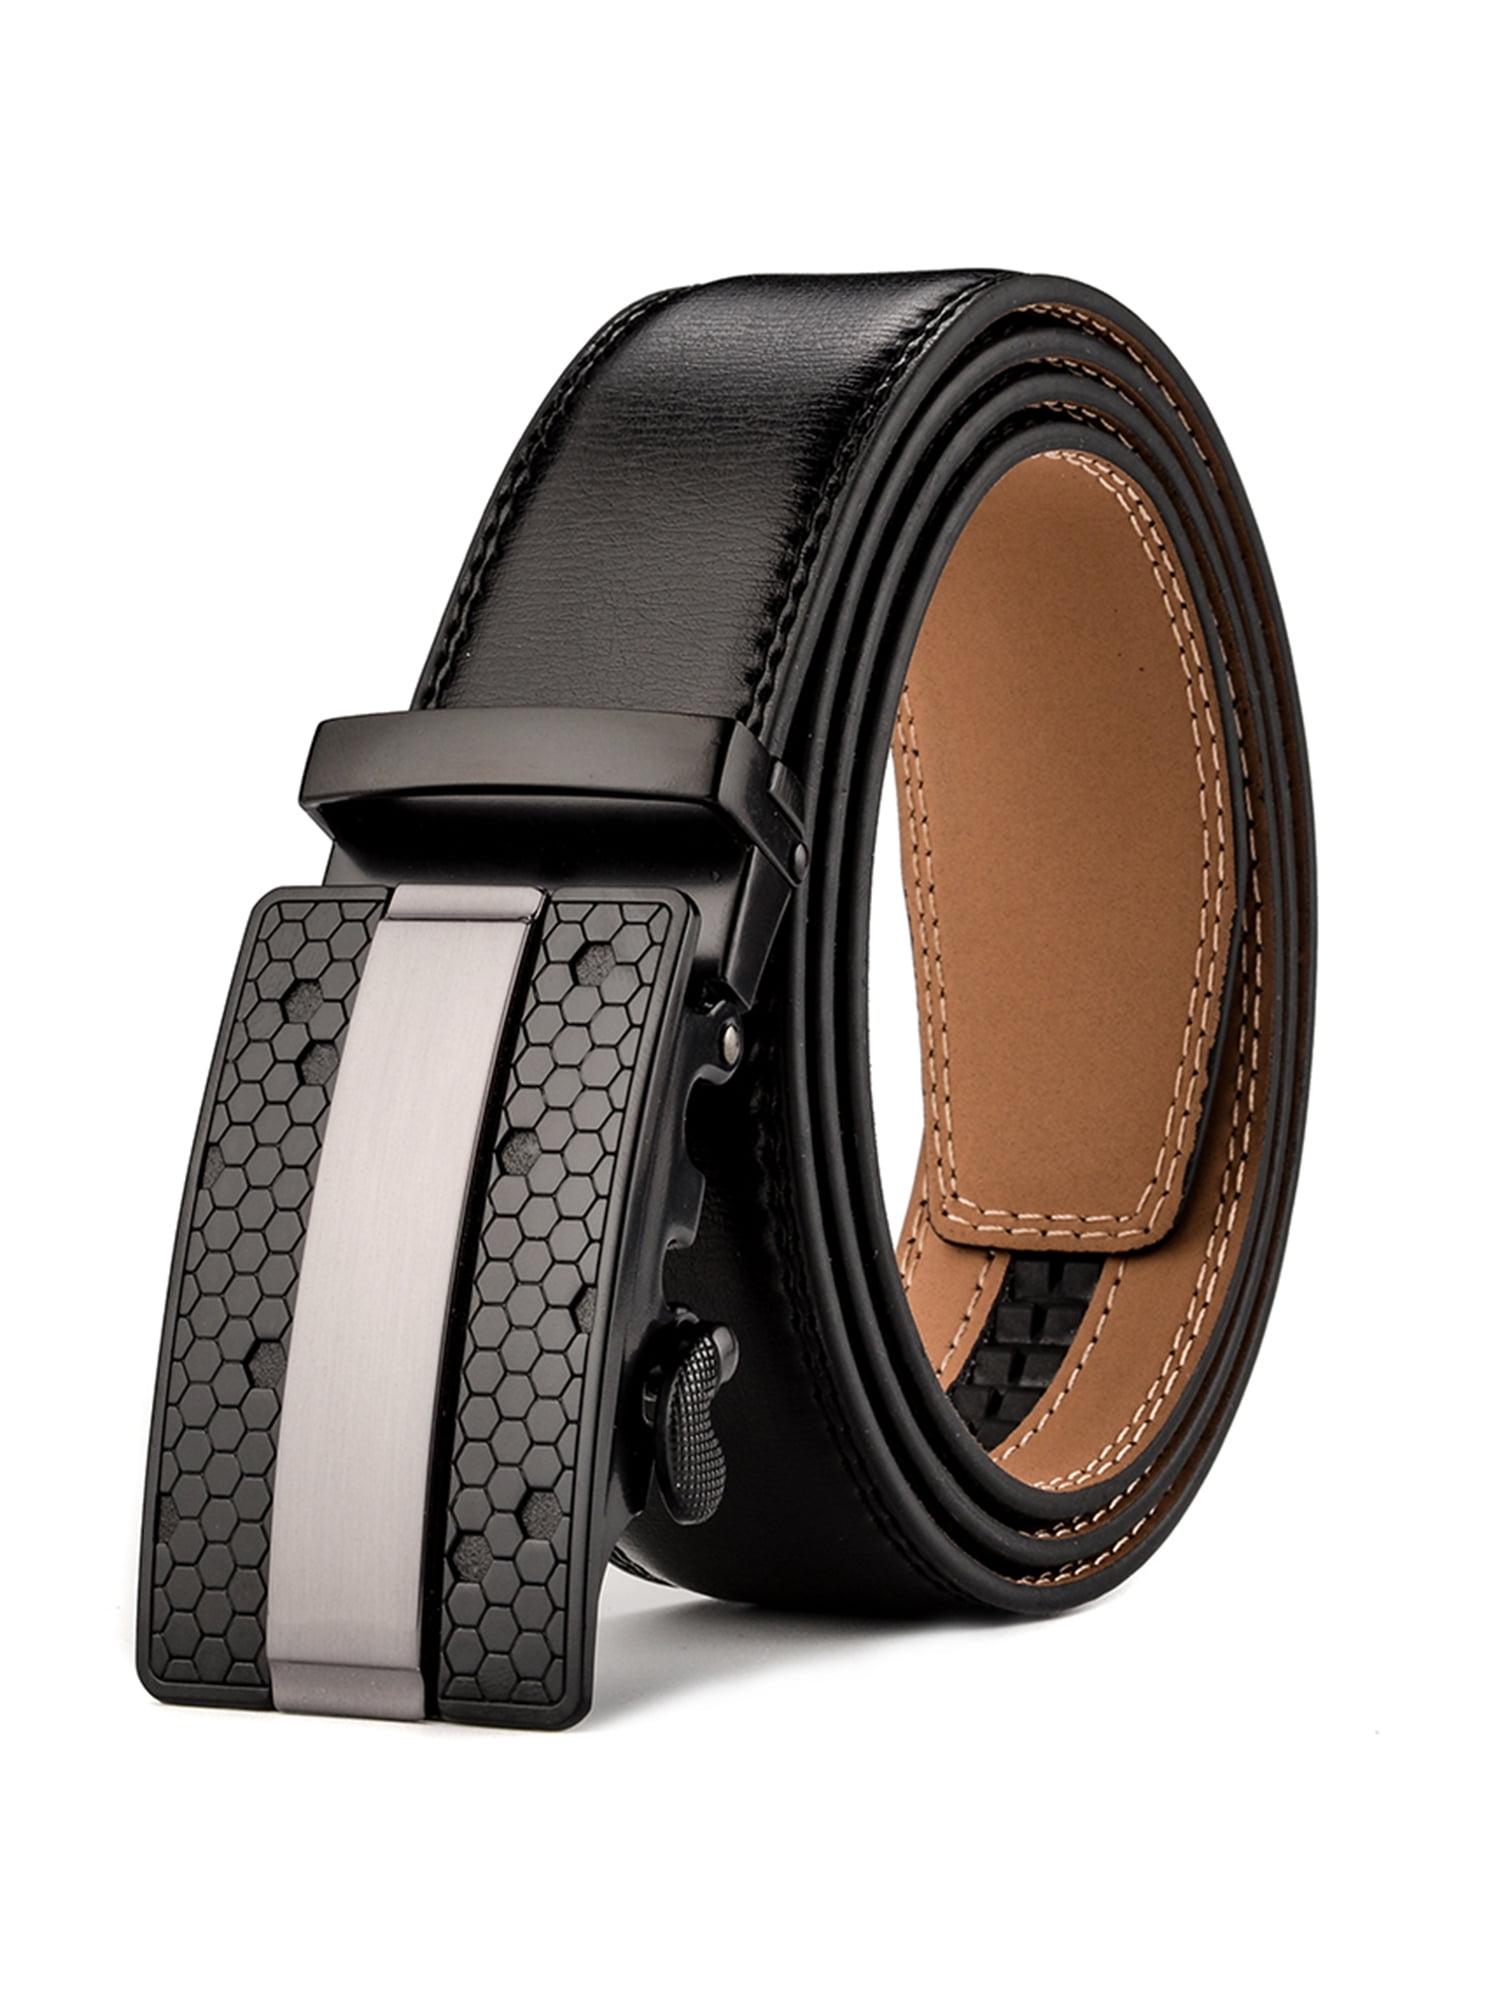 VANNANBA Mens Fashion Leather Belt with Ratchet Automatic Buckle Designer  Belts for Men,with Gift Box(28-34 Waist Adjustable,Black-orange) at   Men's Clothing store